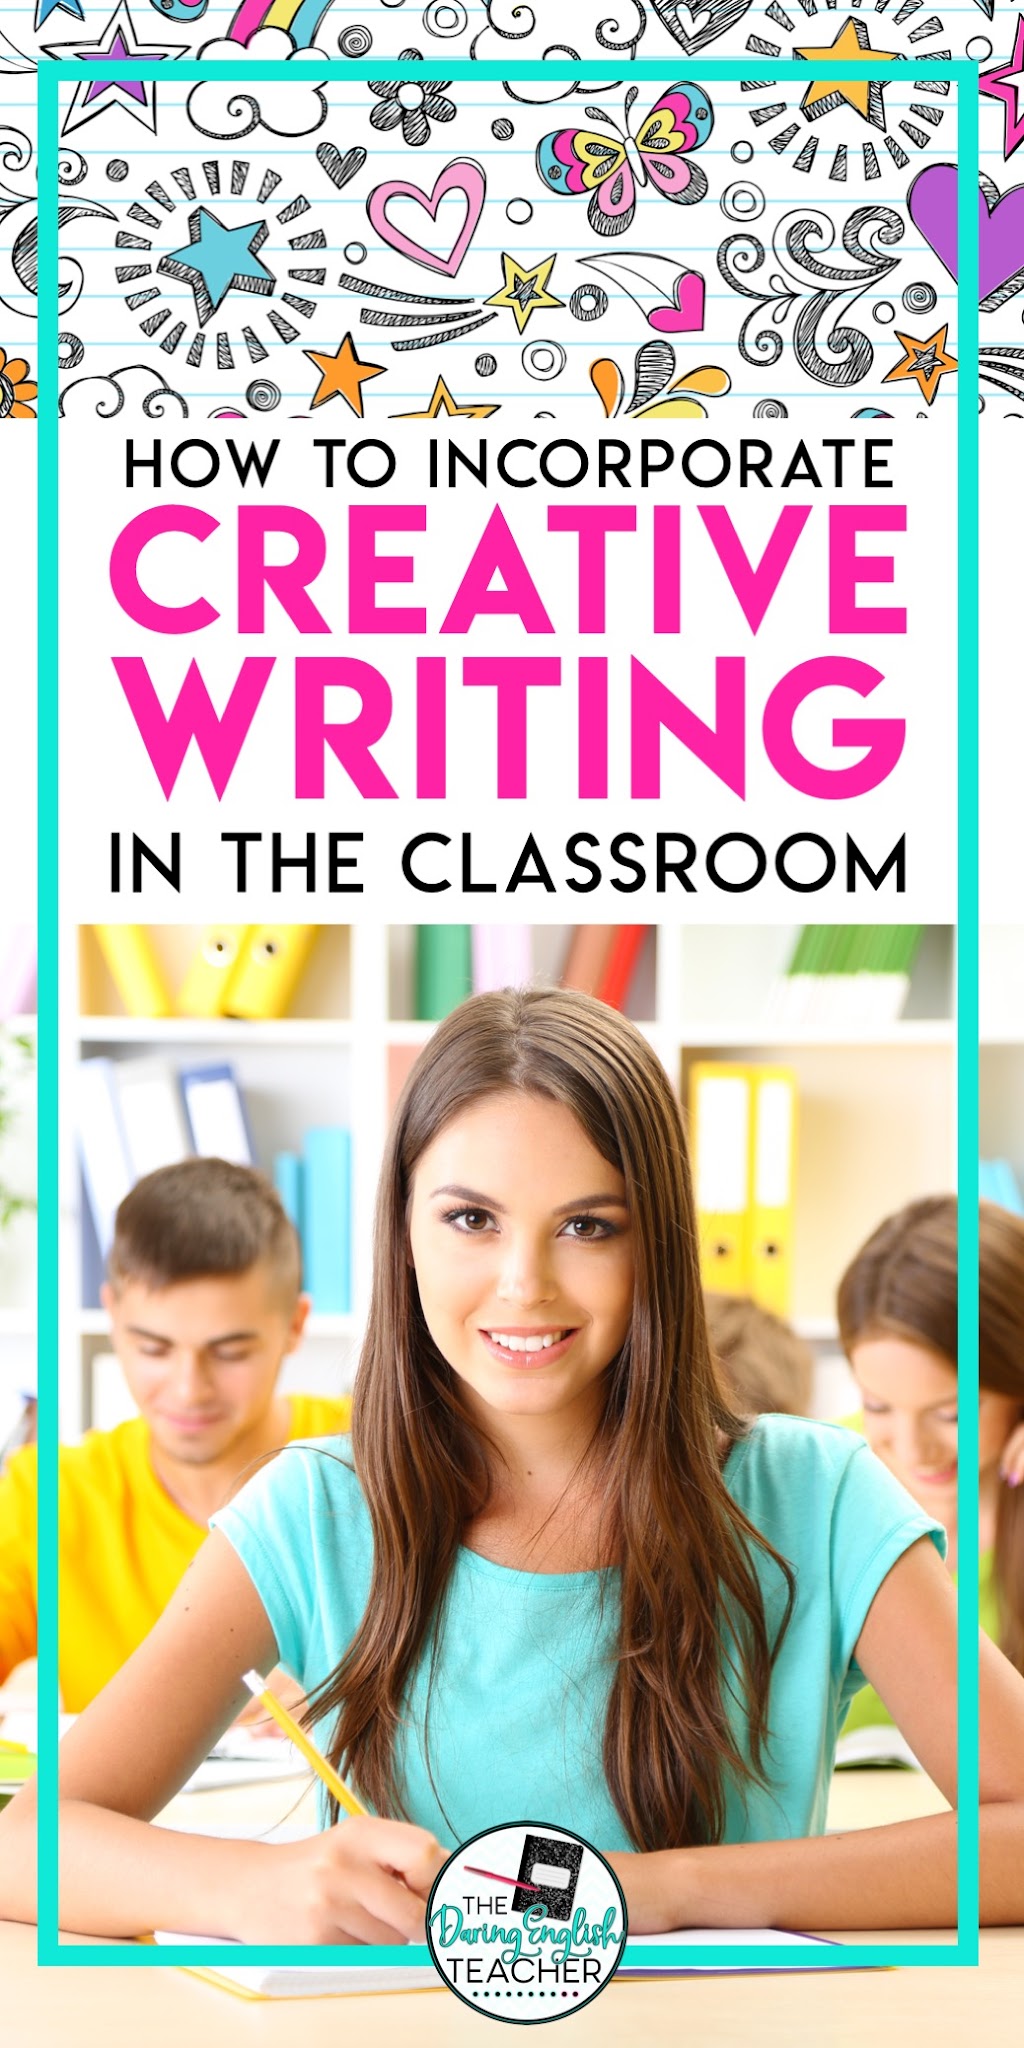 How to Incorporate Creative Writing in the Classroom